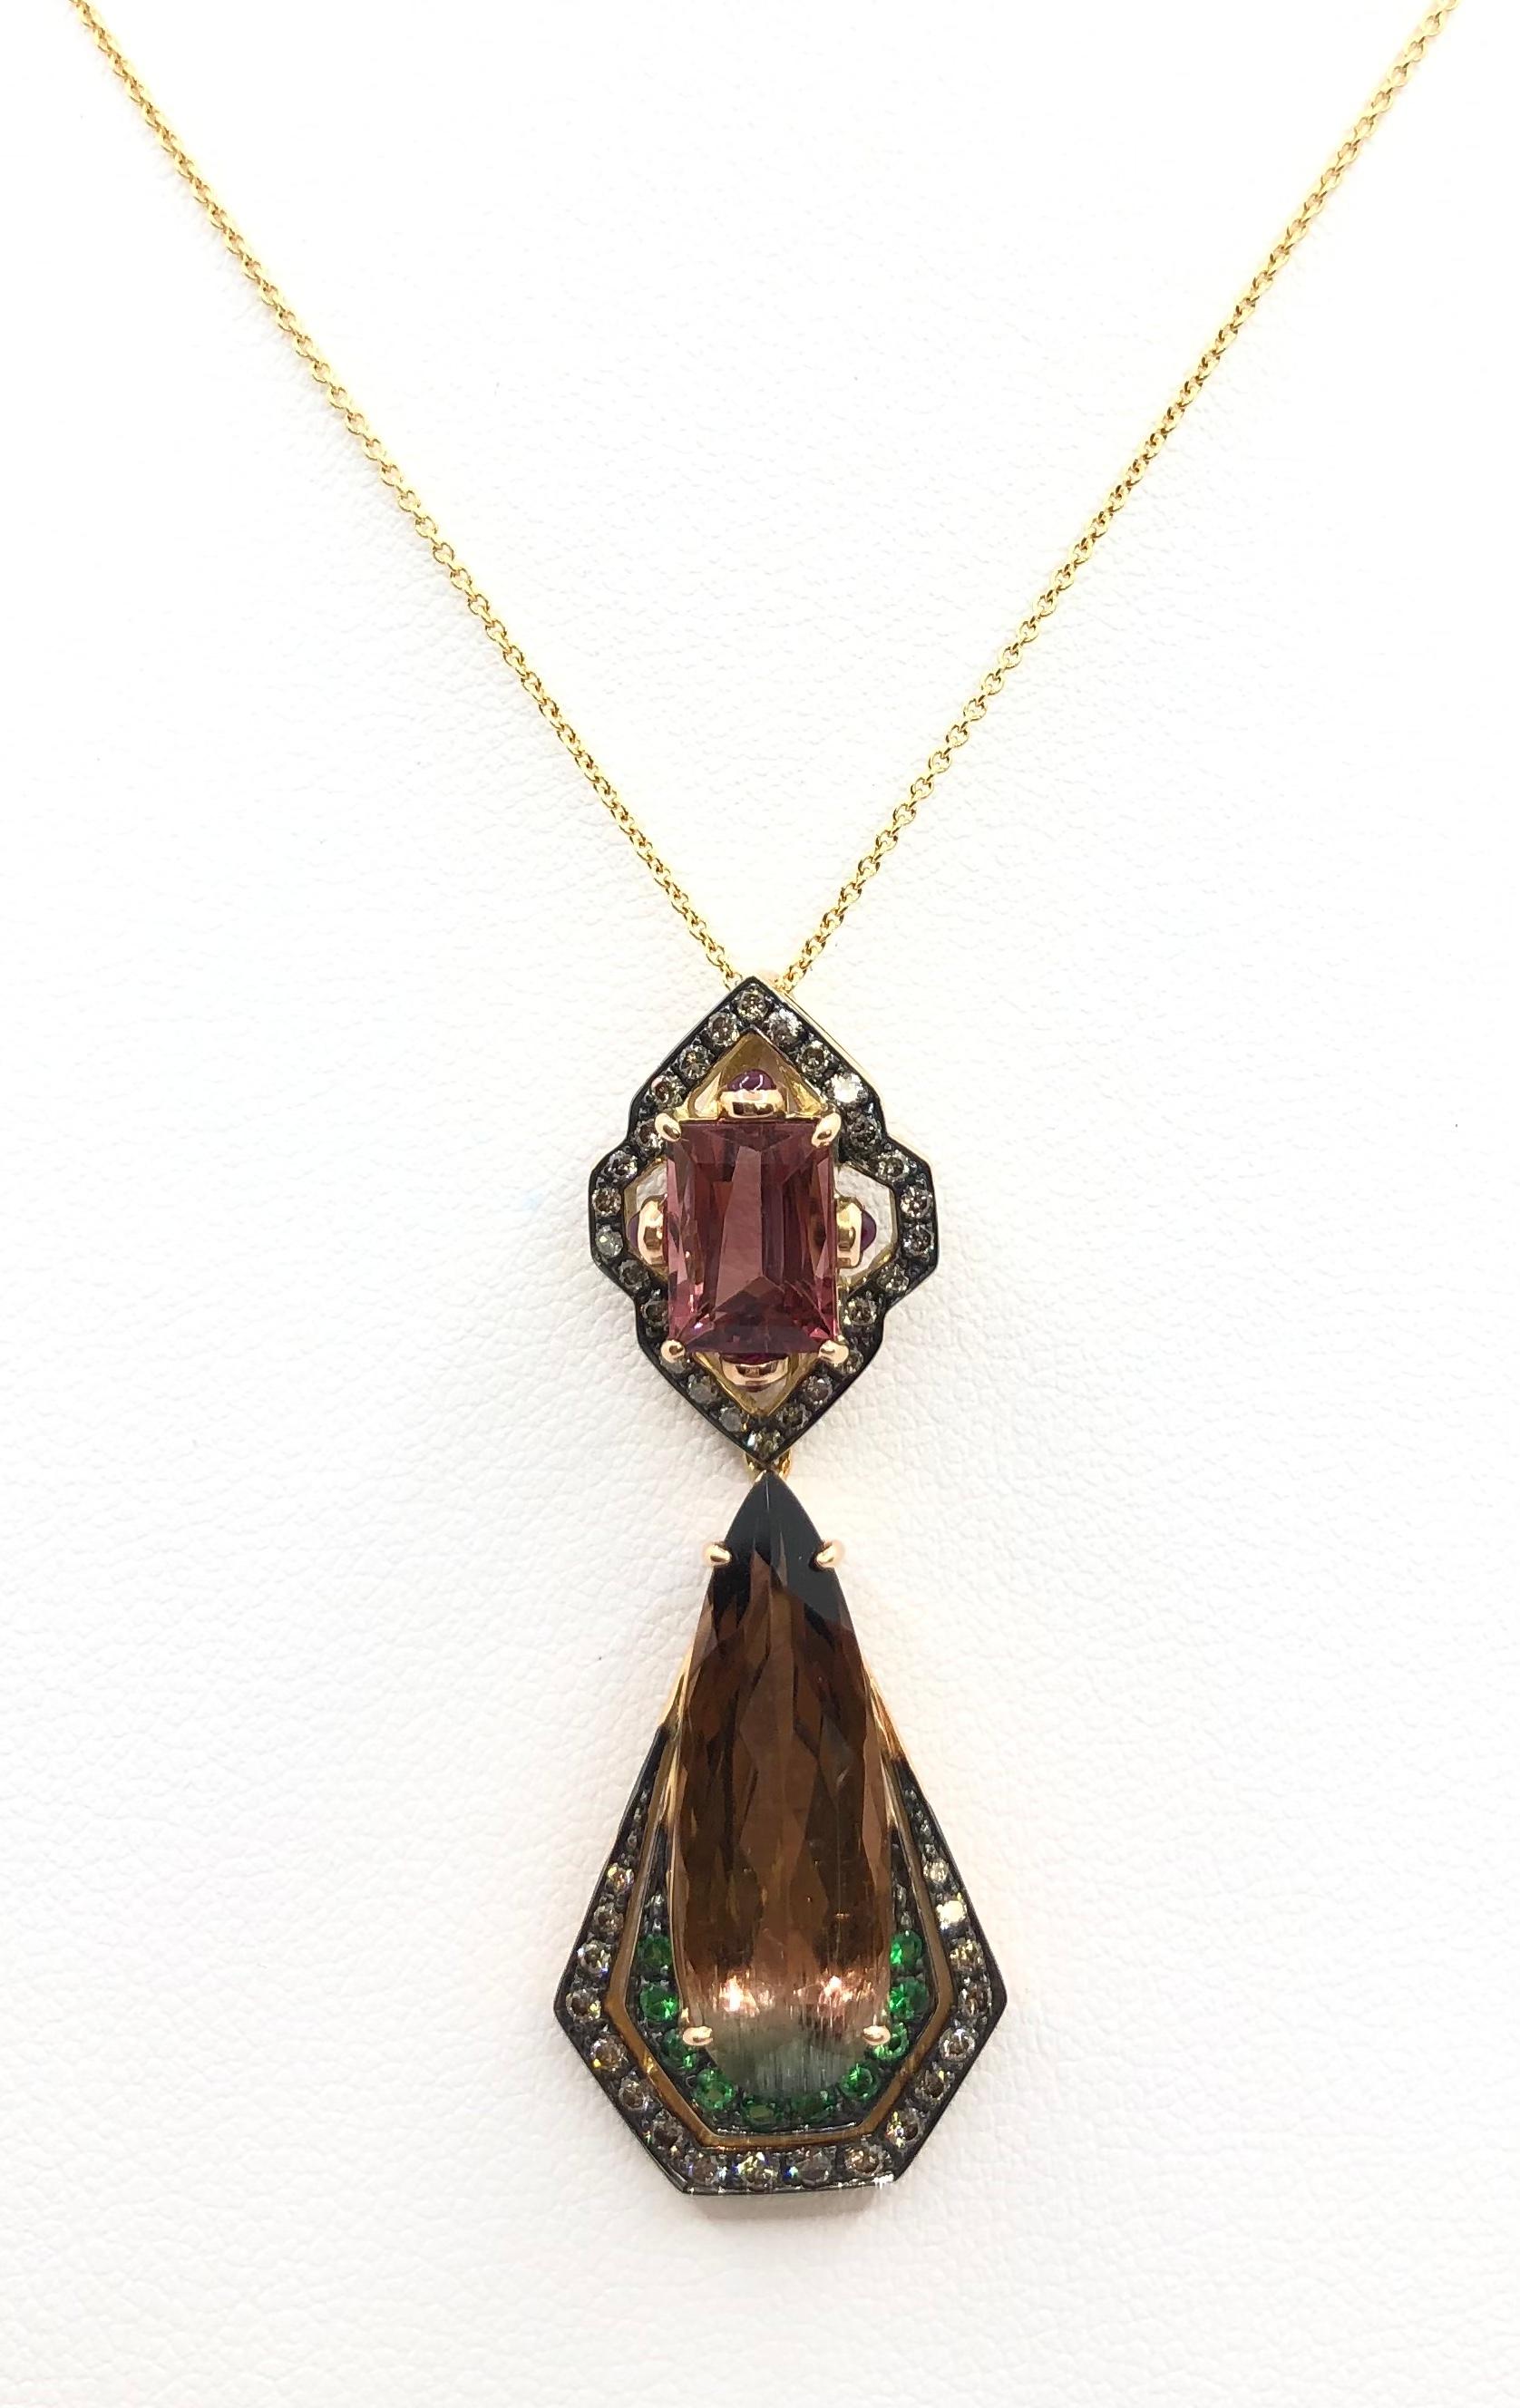 Tourmaline 7.86 carats with Ruby 0.12 carat, Tsavorite 0.15 carat and Brown Diamond 0.42 carat Pendant set in 18 Karat Gold Settings
(chain not included)

Width: 1.7 cm 
Length: 4.4 cm
Total Weight: 6.94 grams

